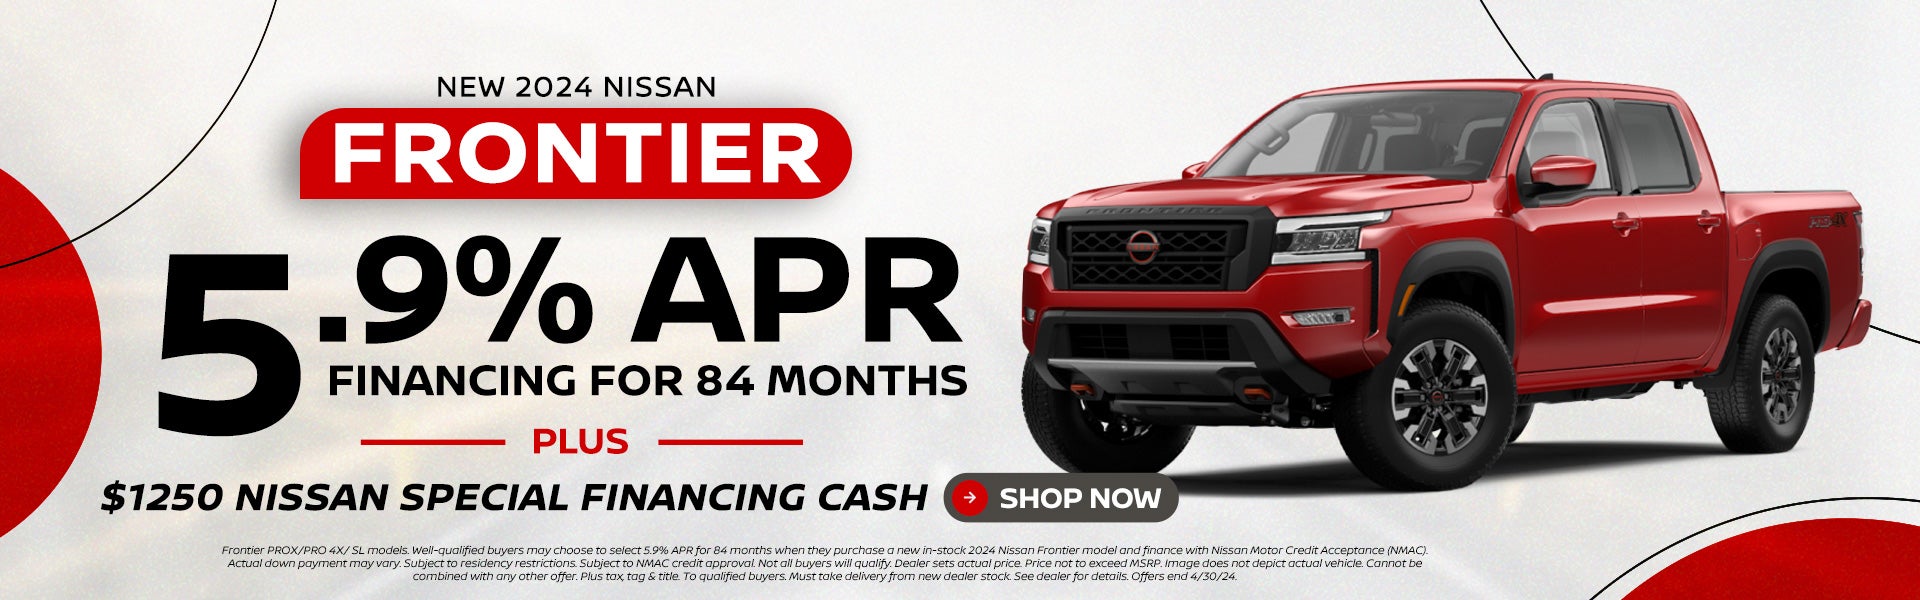 2024 Nissan Frontier 5.9% 84 mo with $1250 Nissan Cash